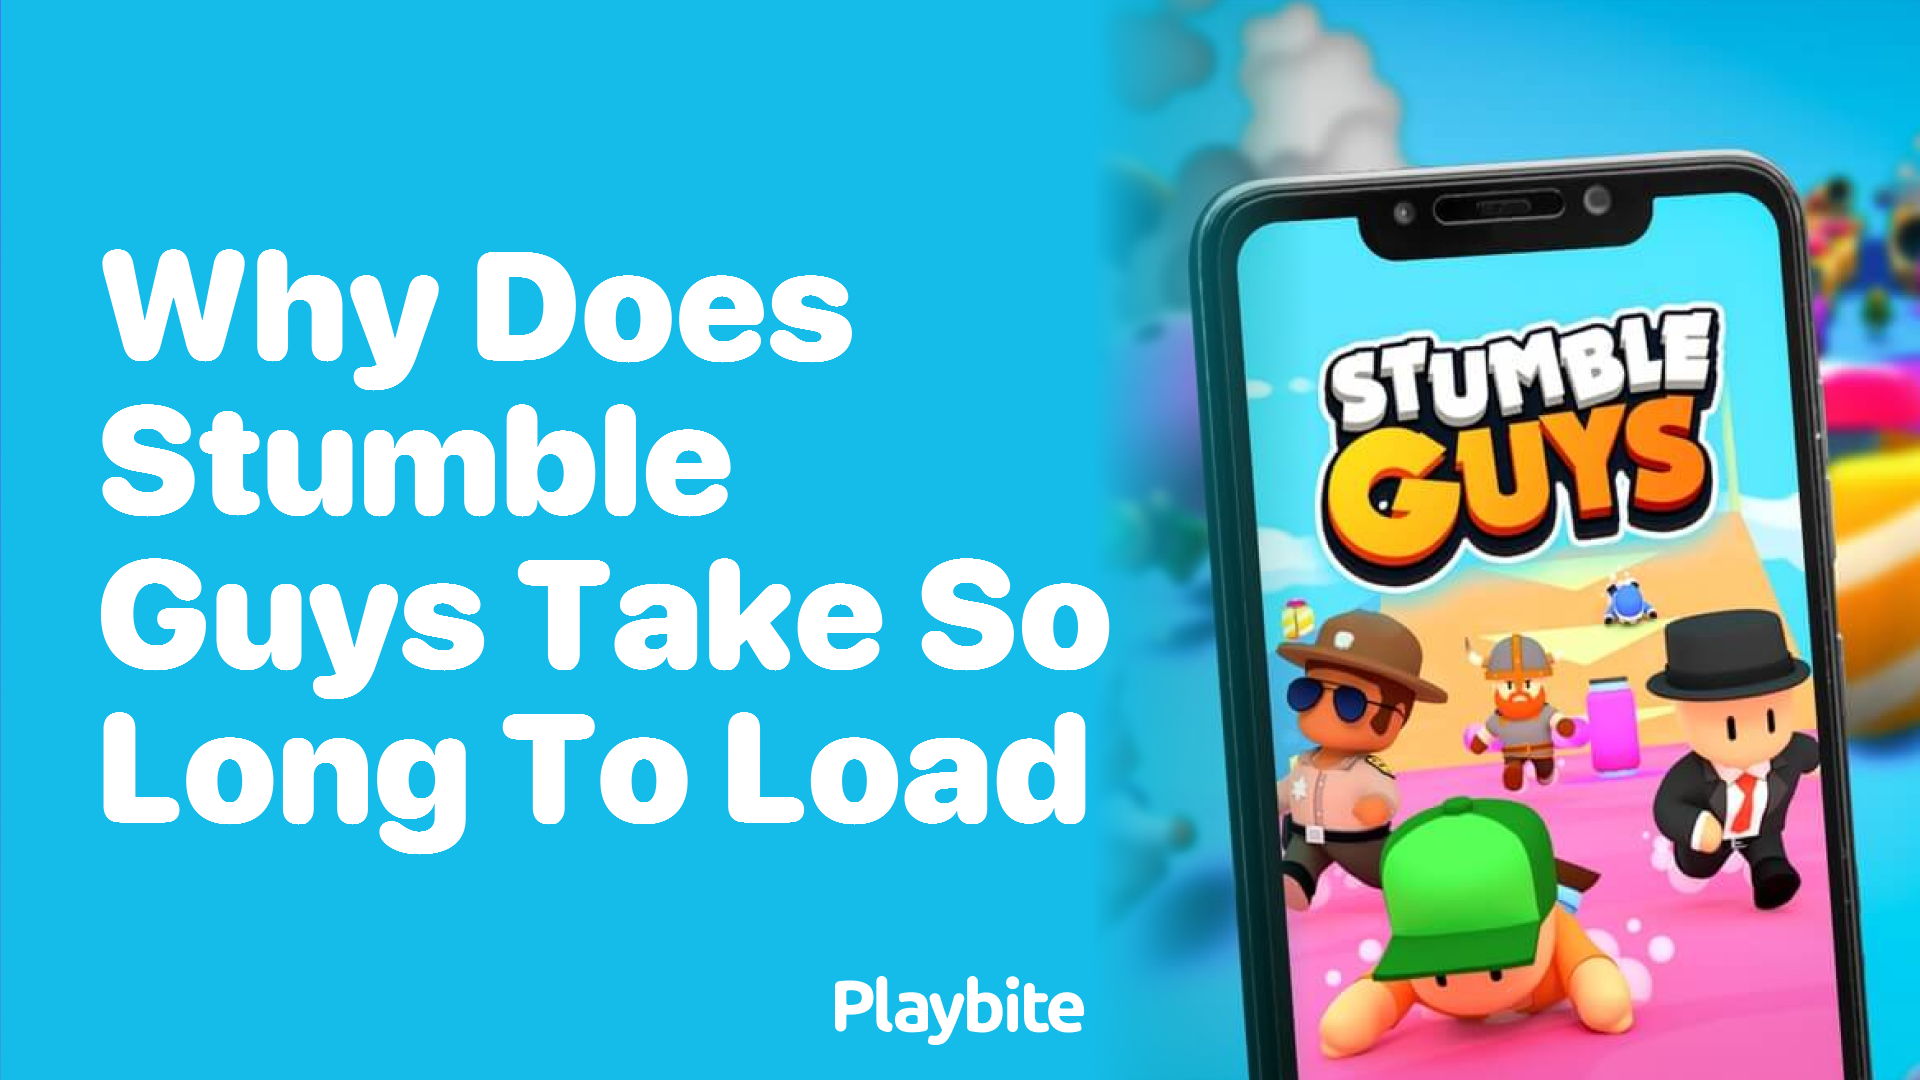 Why Does Stumble Guys Take So Long to Load?